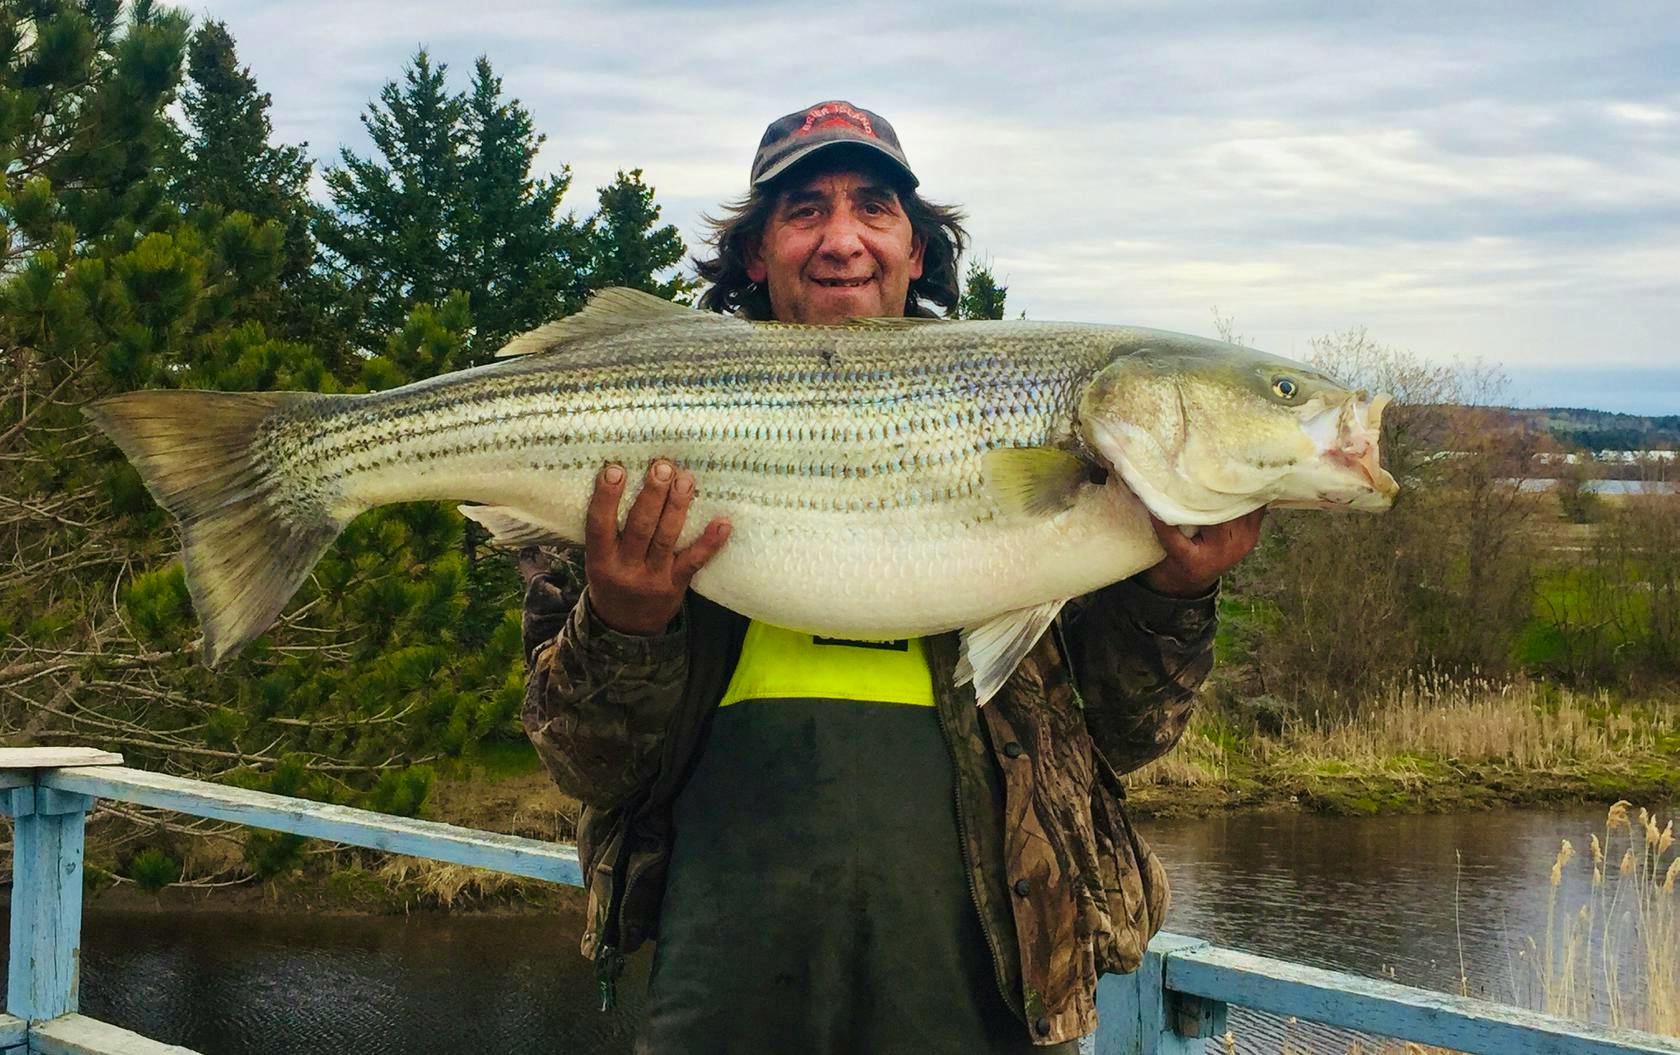 All about that bass: Nova Scotia man hooks monster fish in